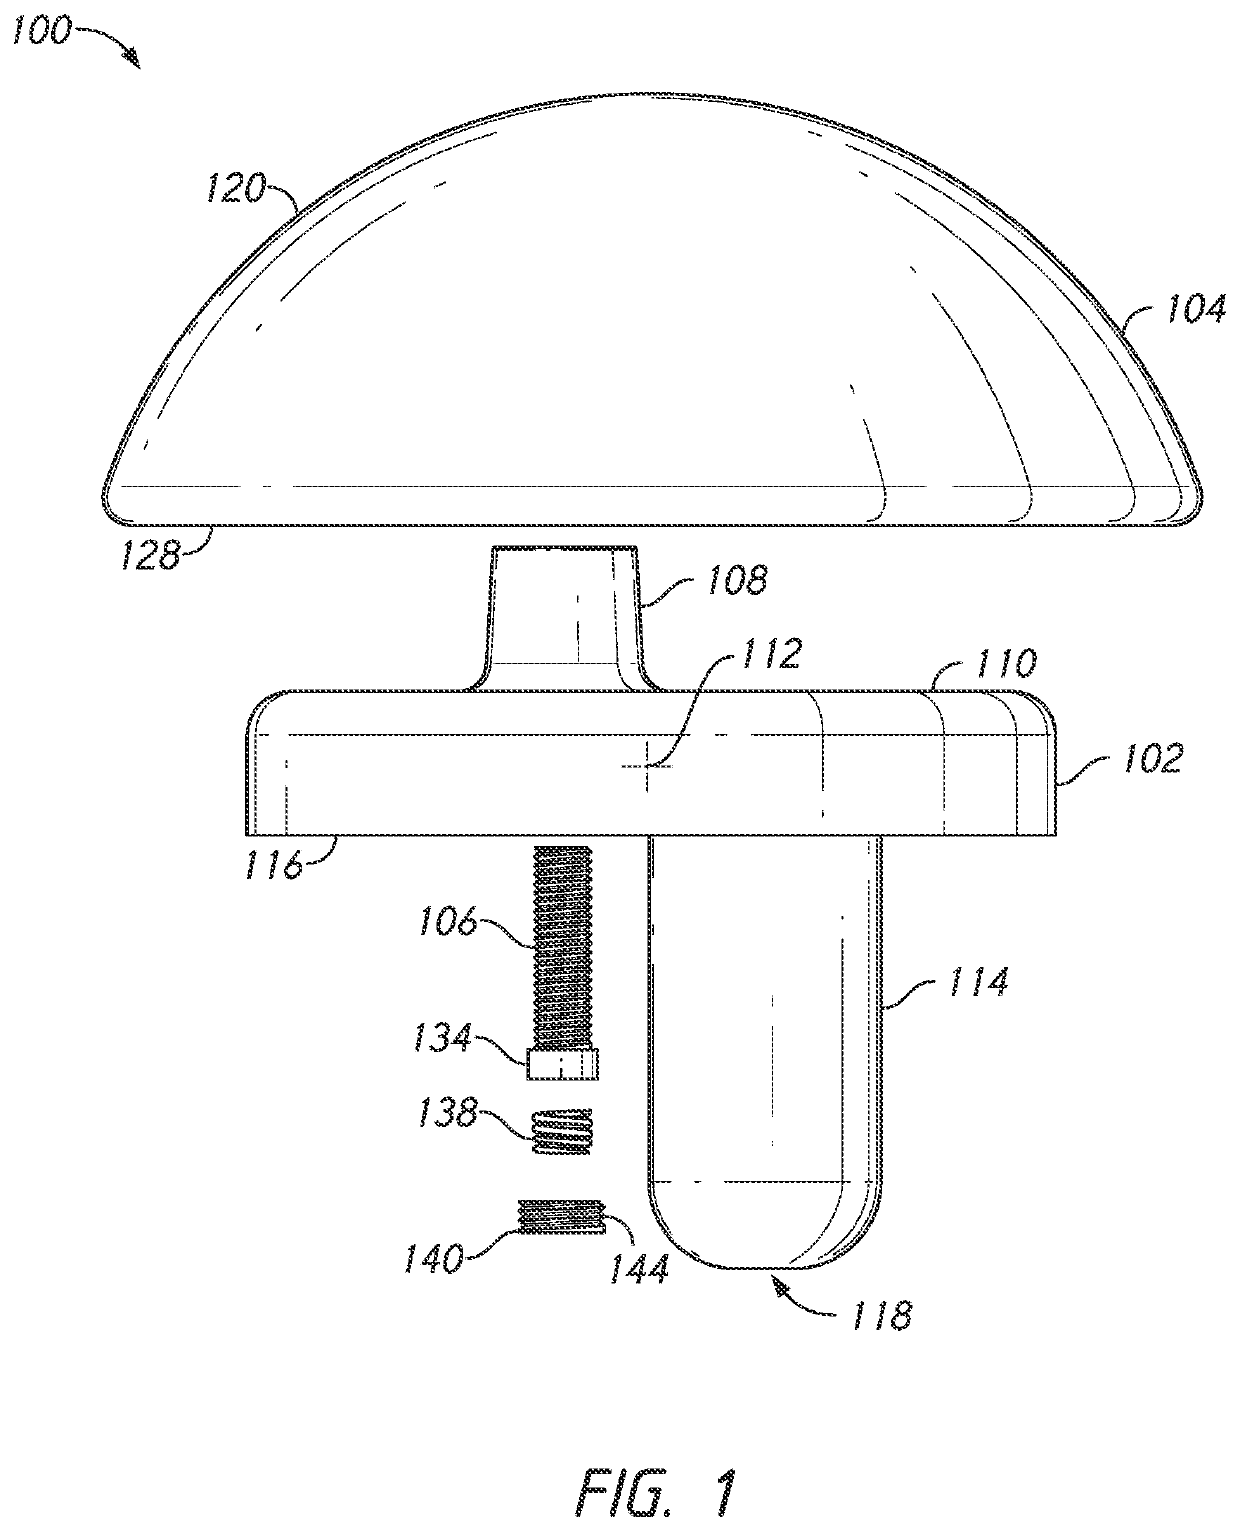 Shoulder implants and methods of use and assembly